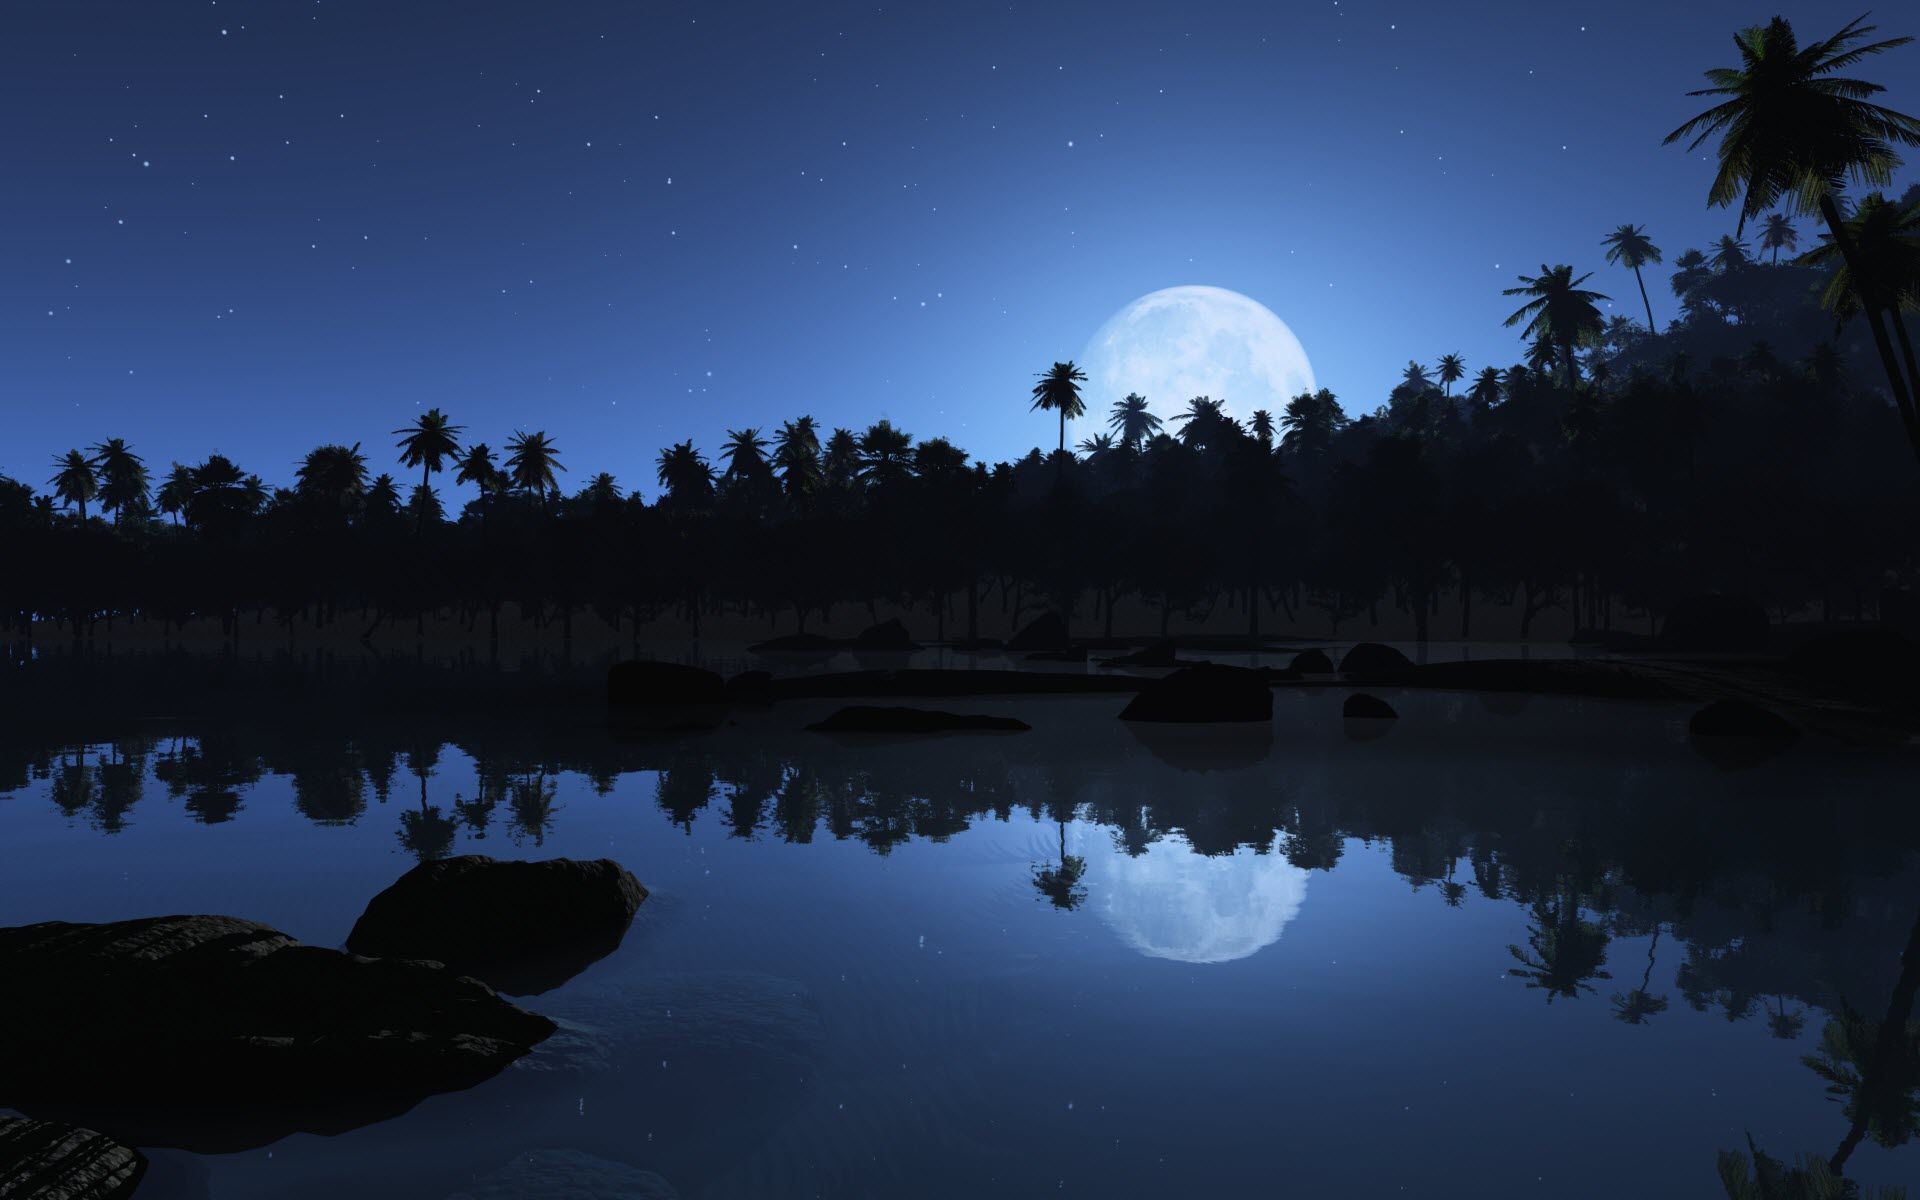 snow night pictures | Forest moon night snow winter f wallpaper ...